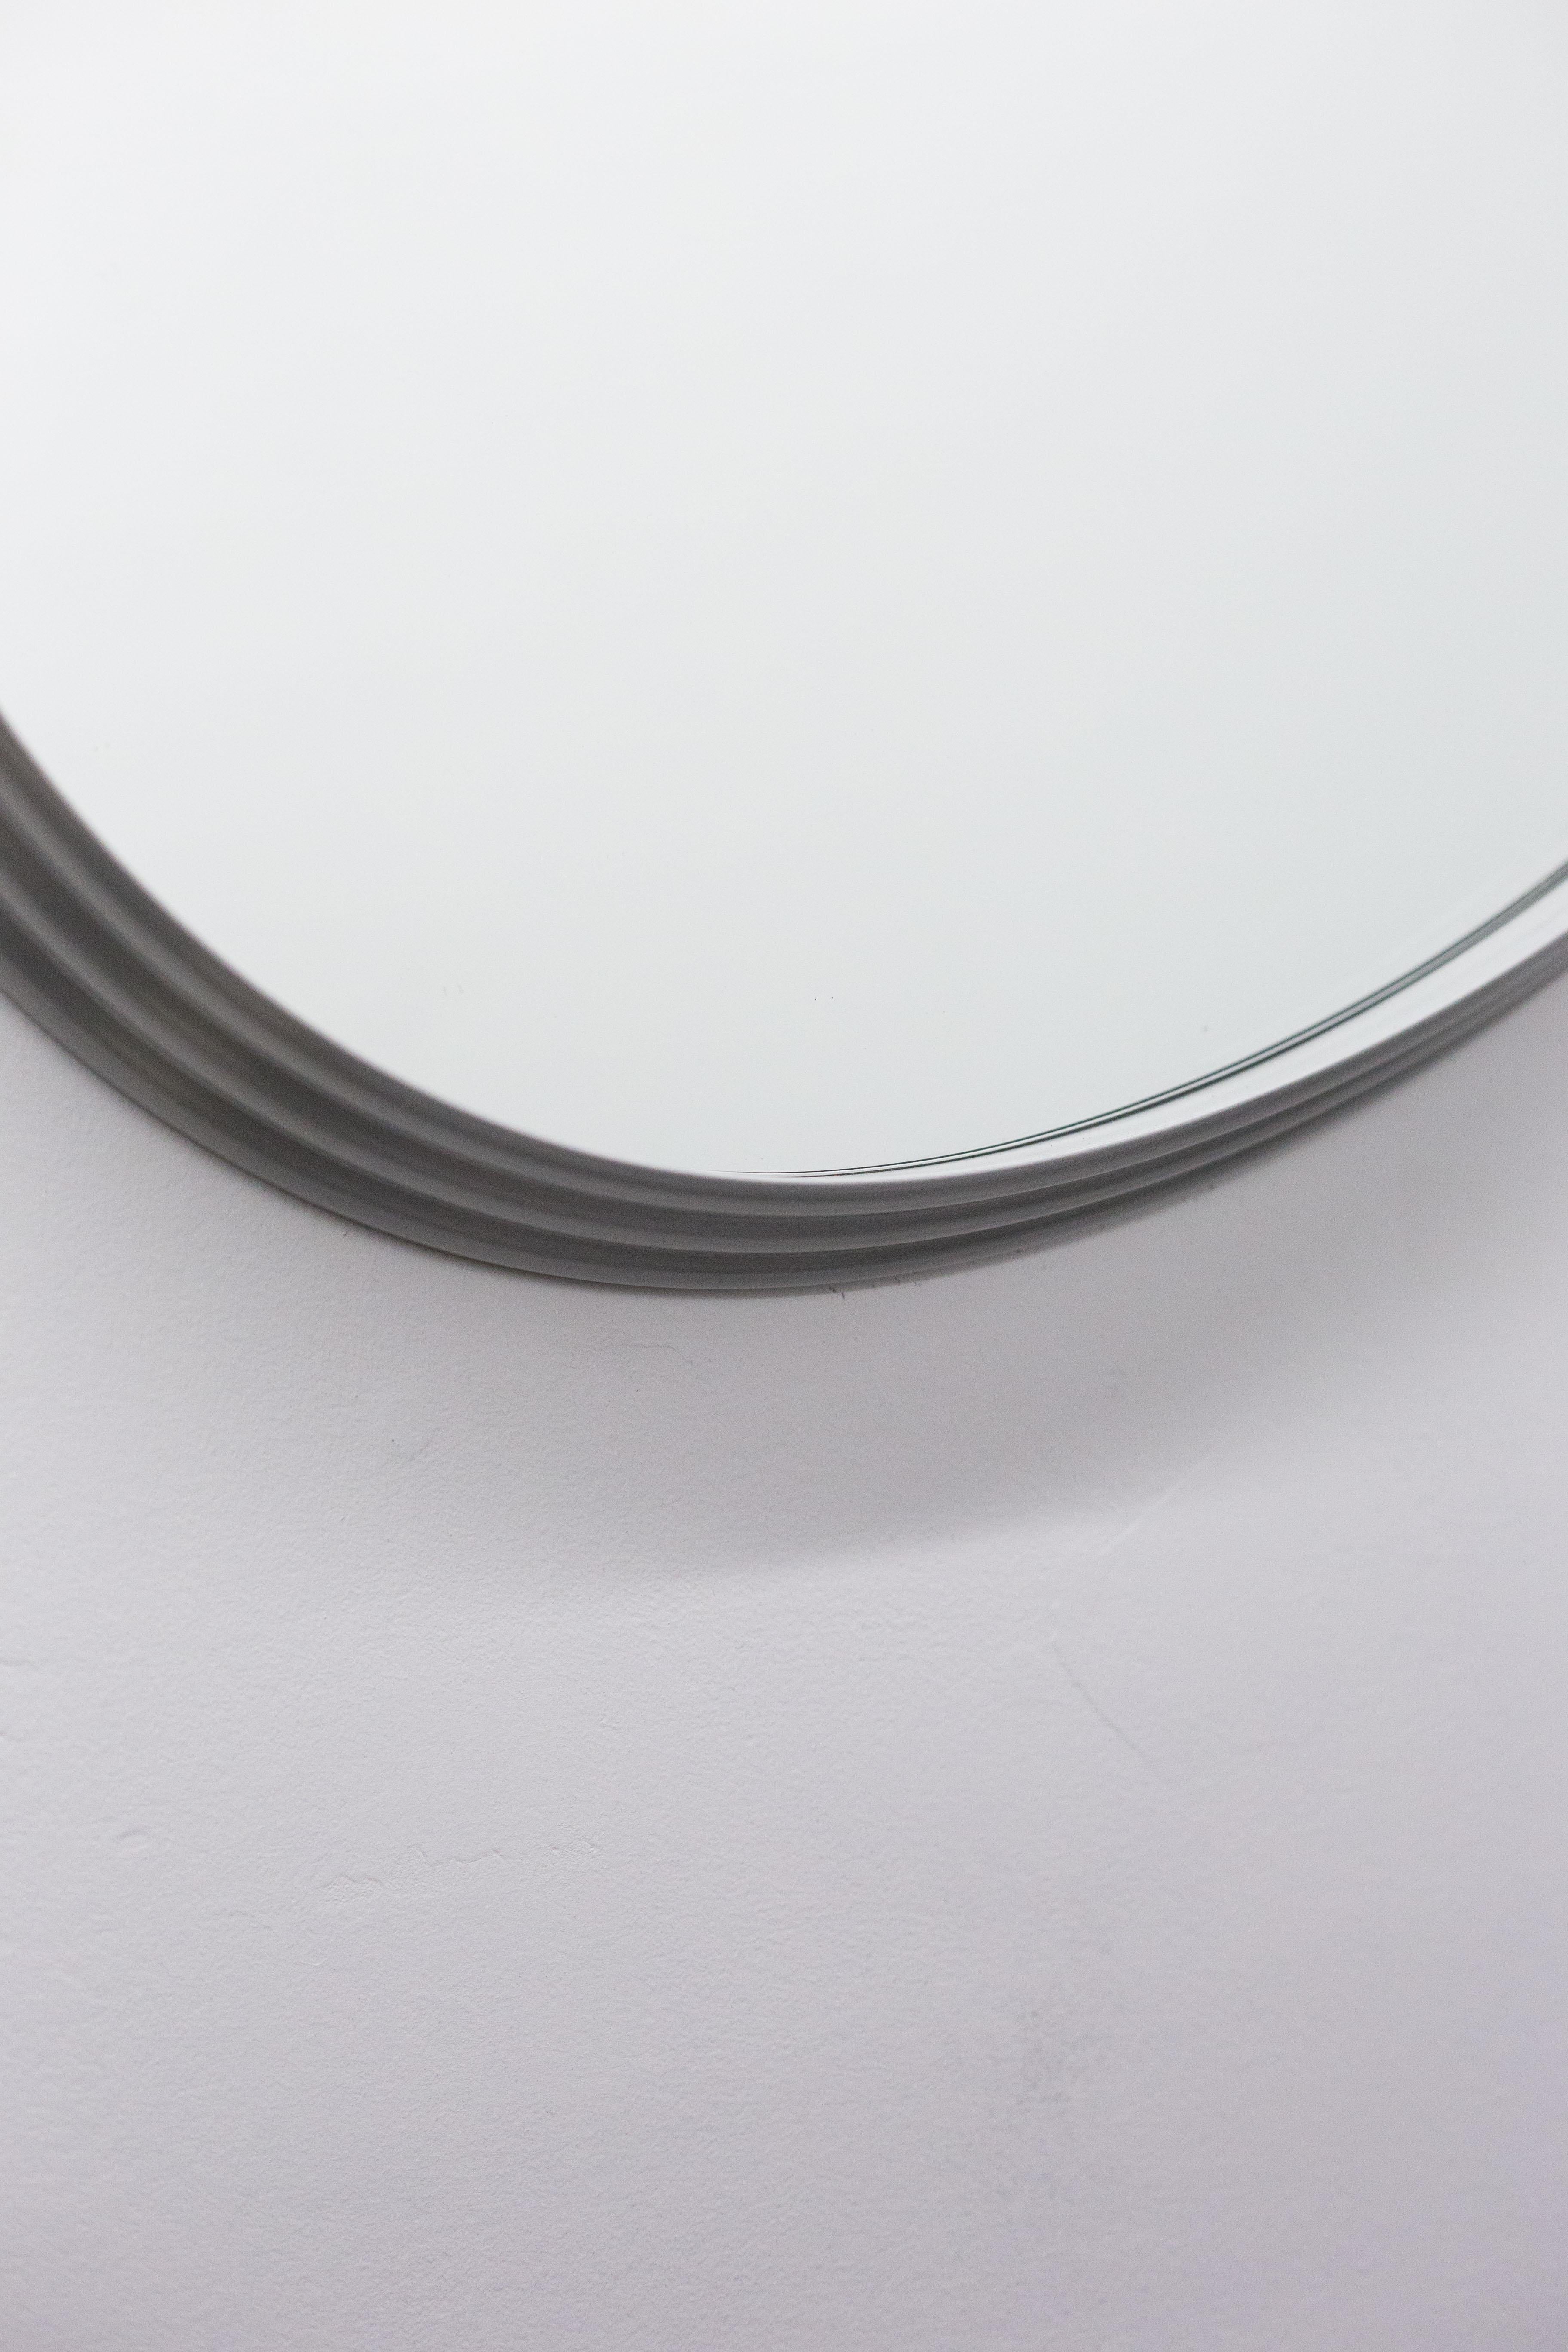 Sweep Wall Mirror in Brushed Aluminum For Sale 1